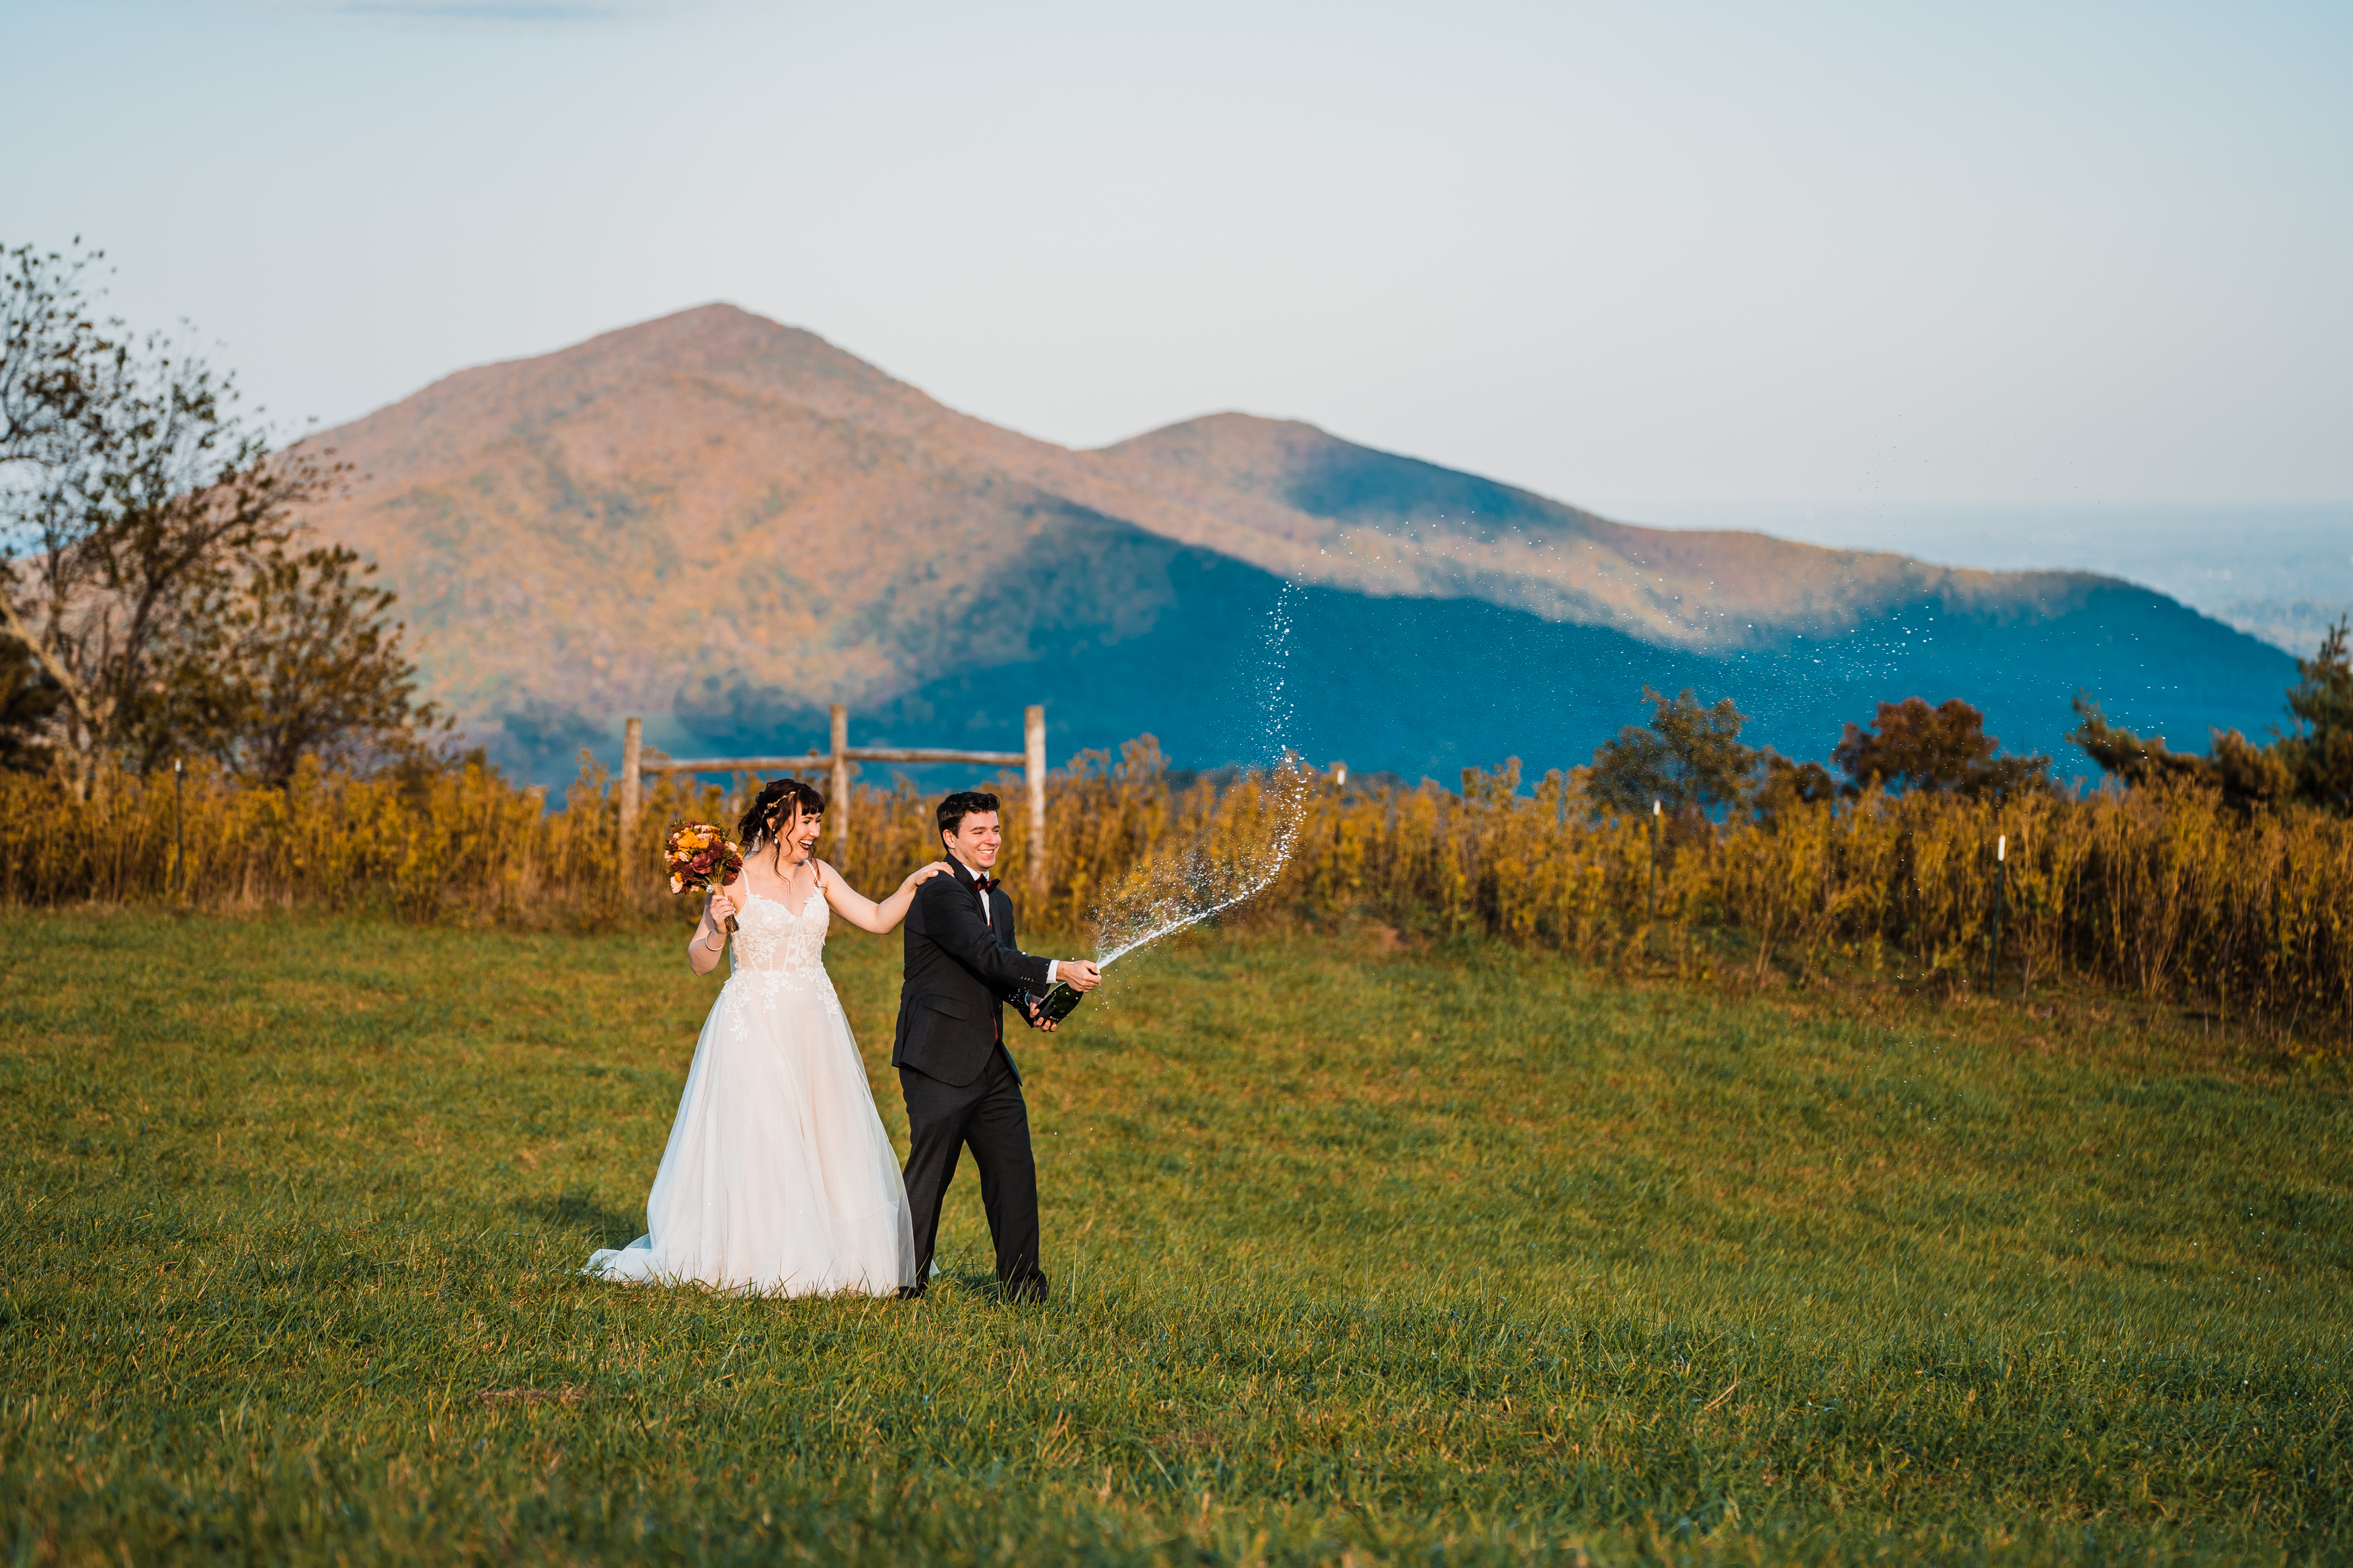 Tennessee Wedding Venues - The Prettiest Places For Your Wedding Day